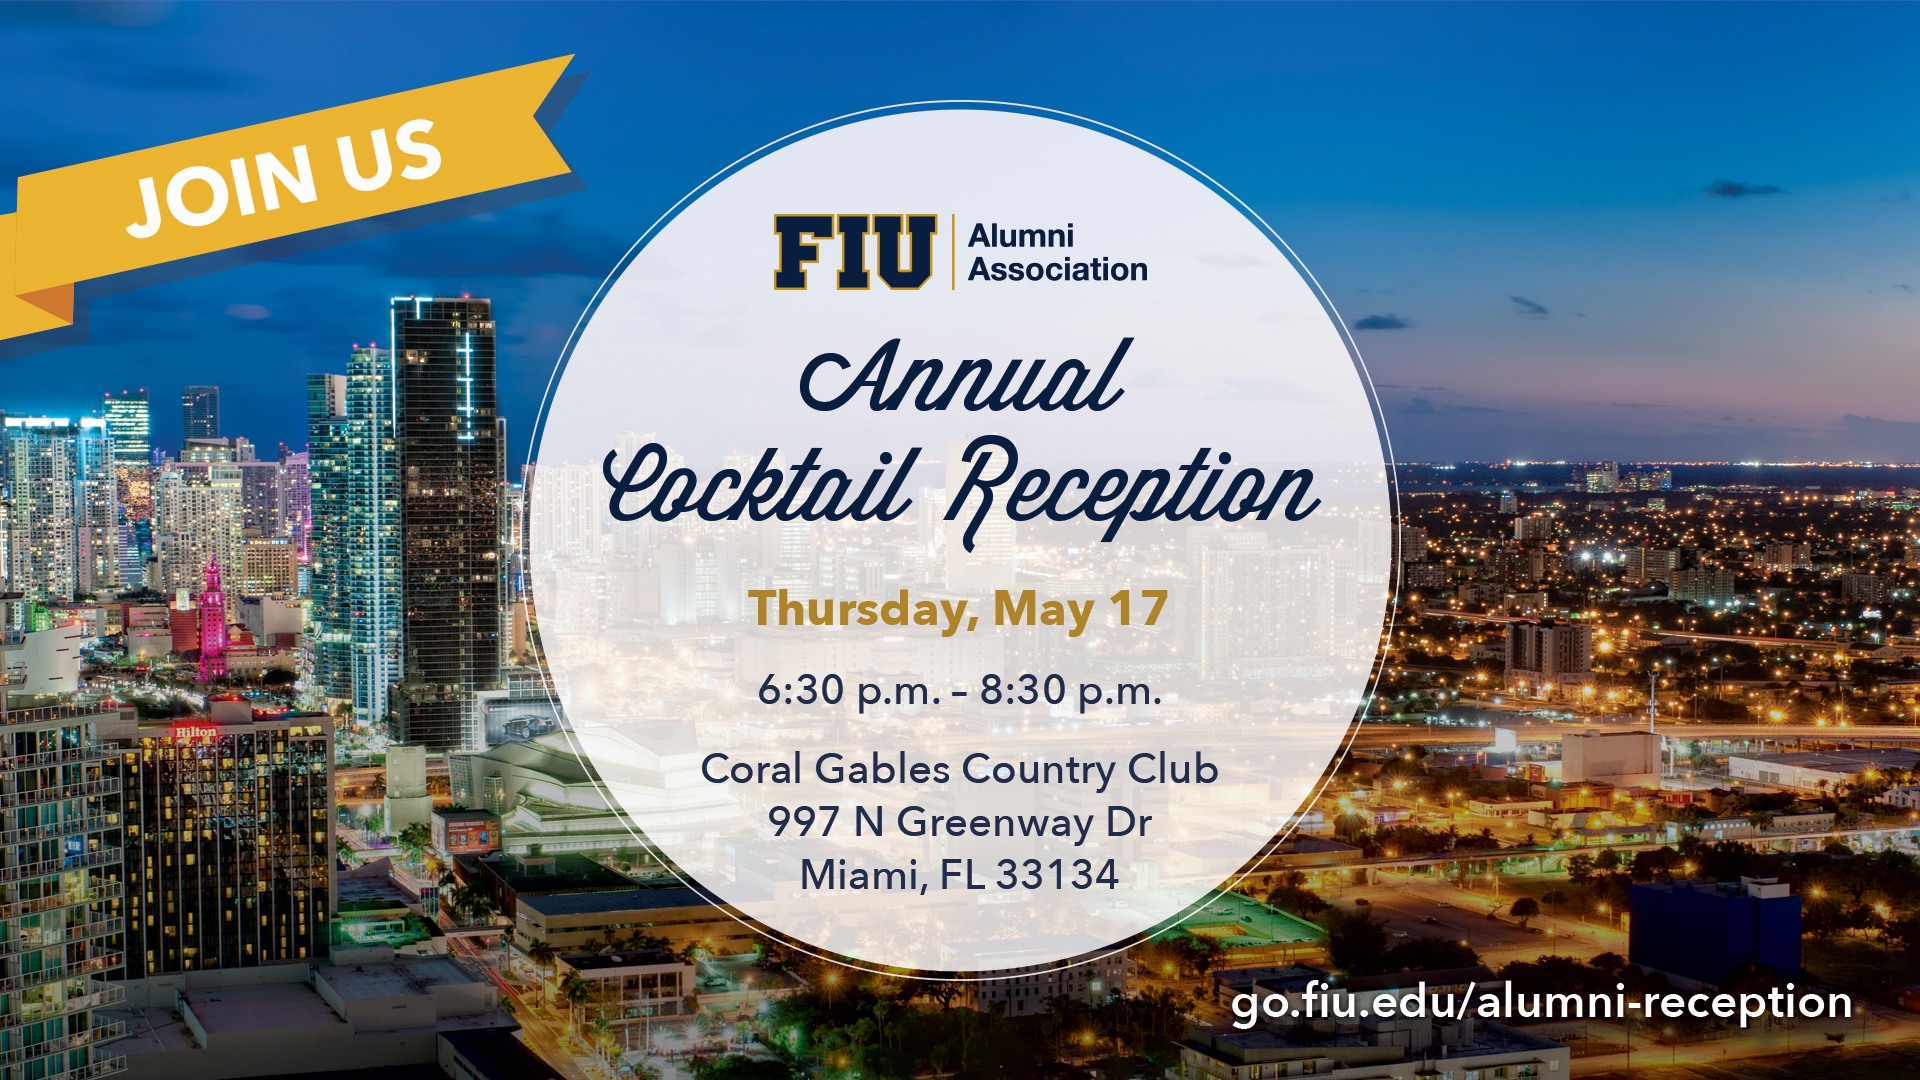 Annual Cocktail Reception - Thursday, May 17 - 6:30pm - 8:30pm